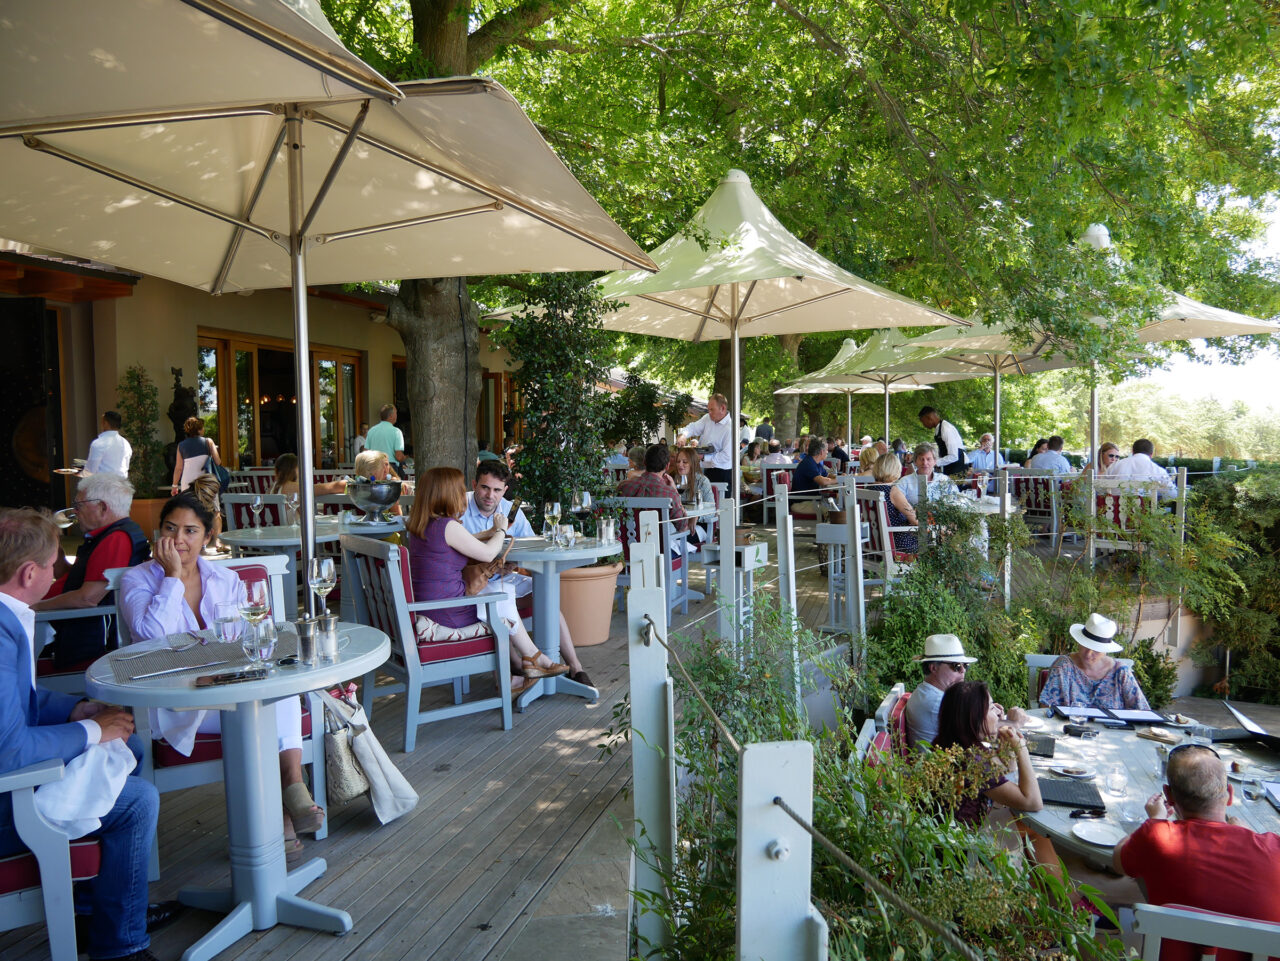 People dining at Delaire Graff Estate restaurant, Cape Town